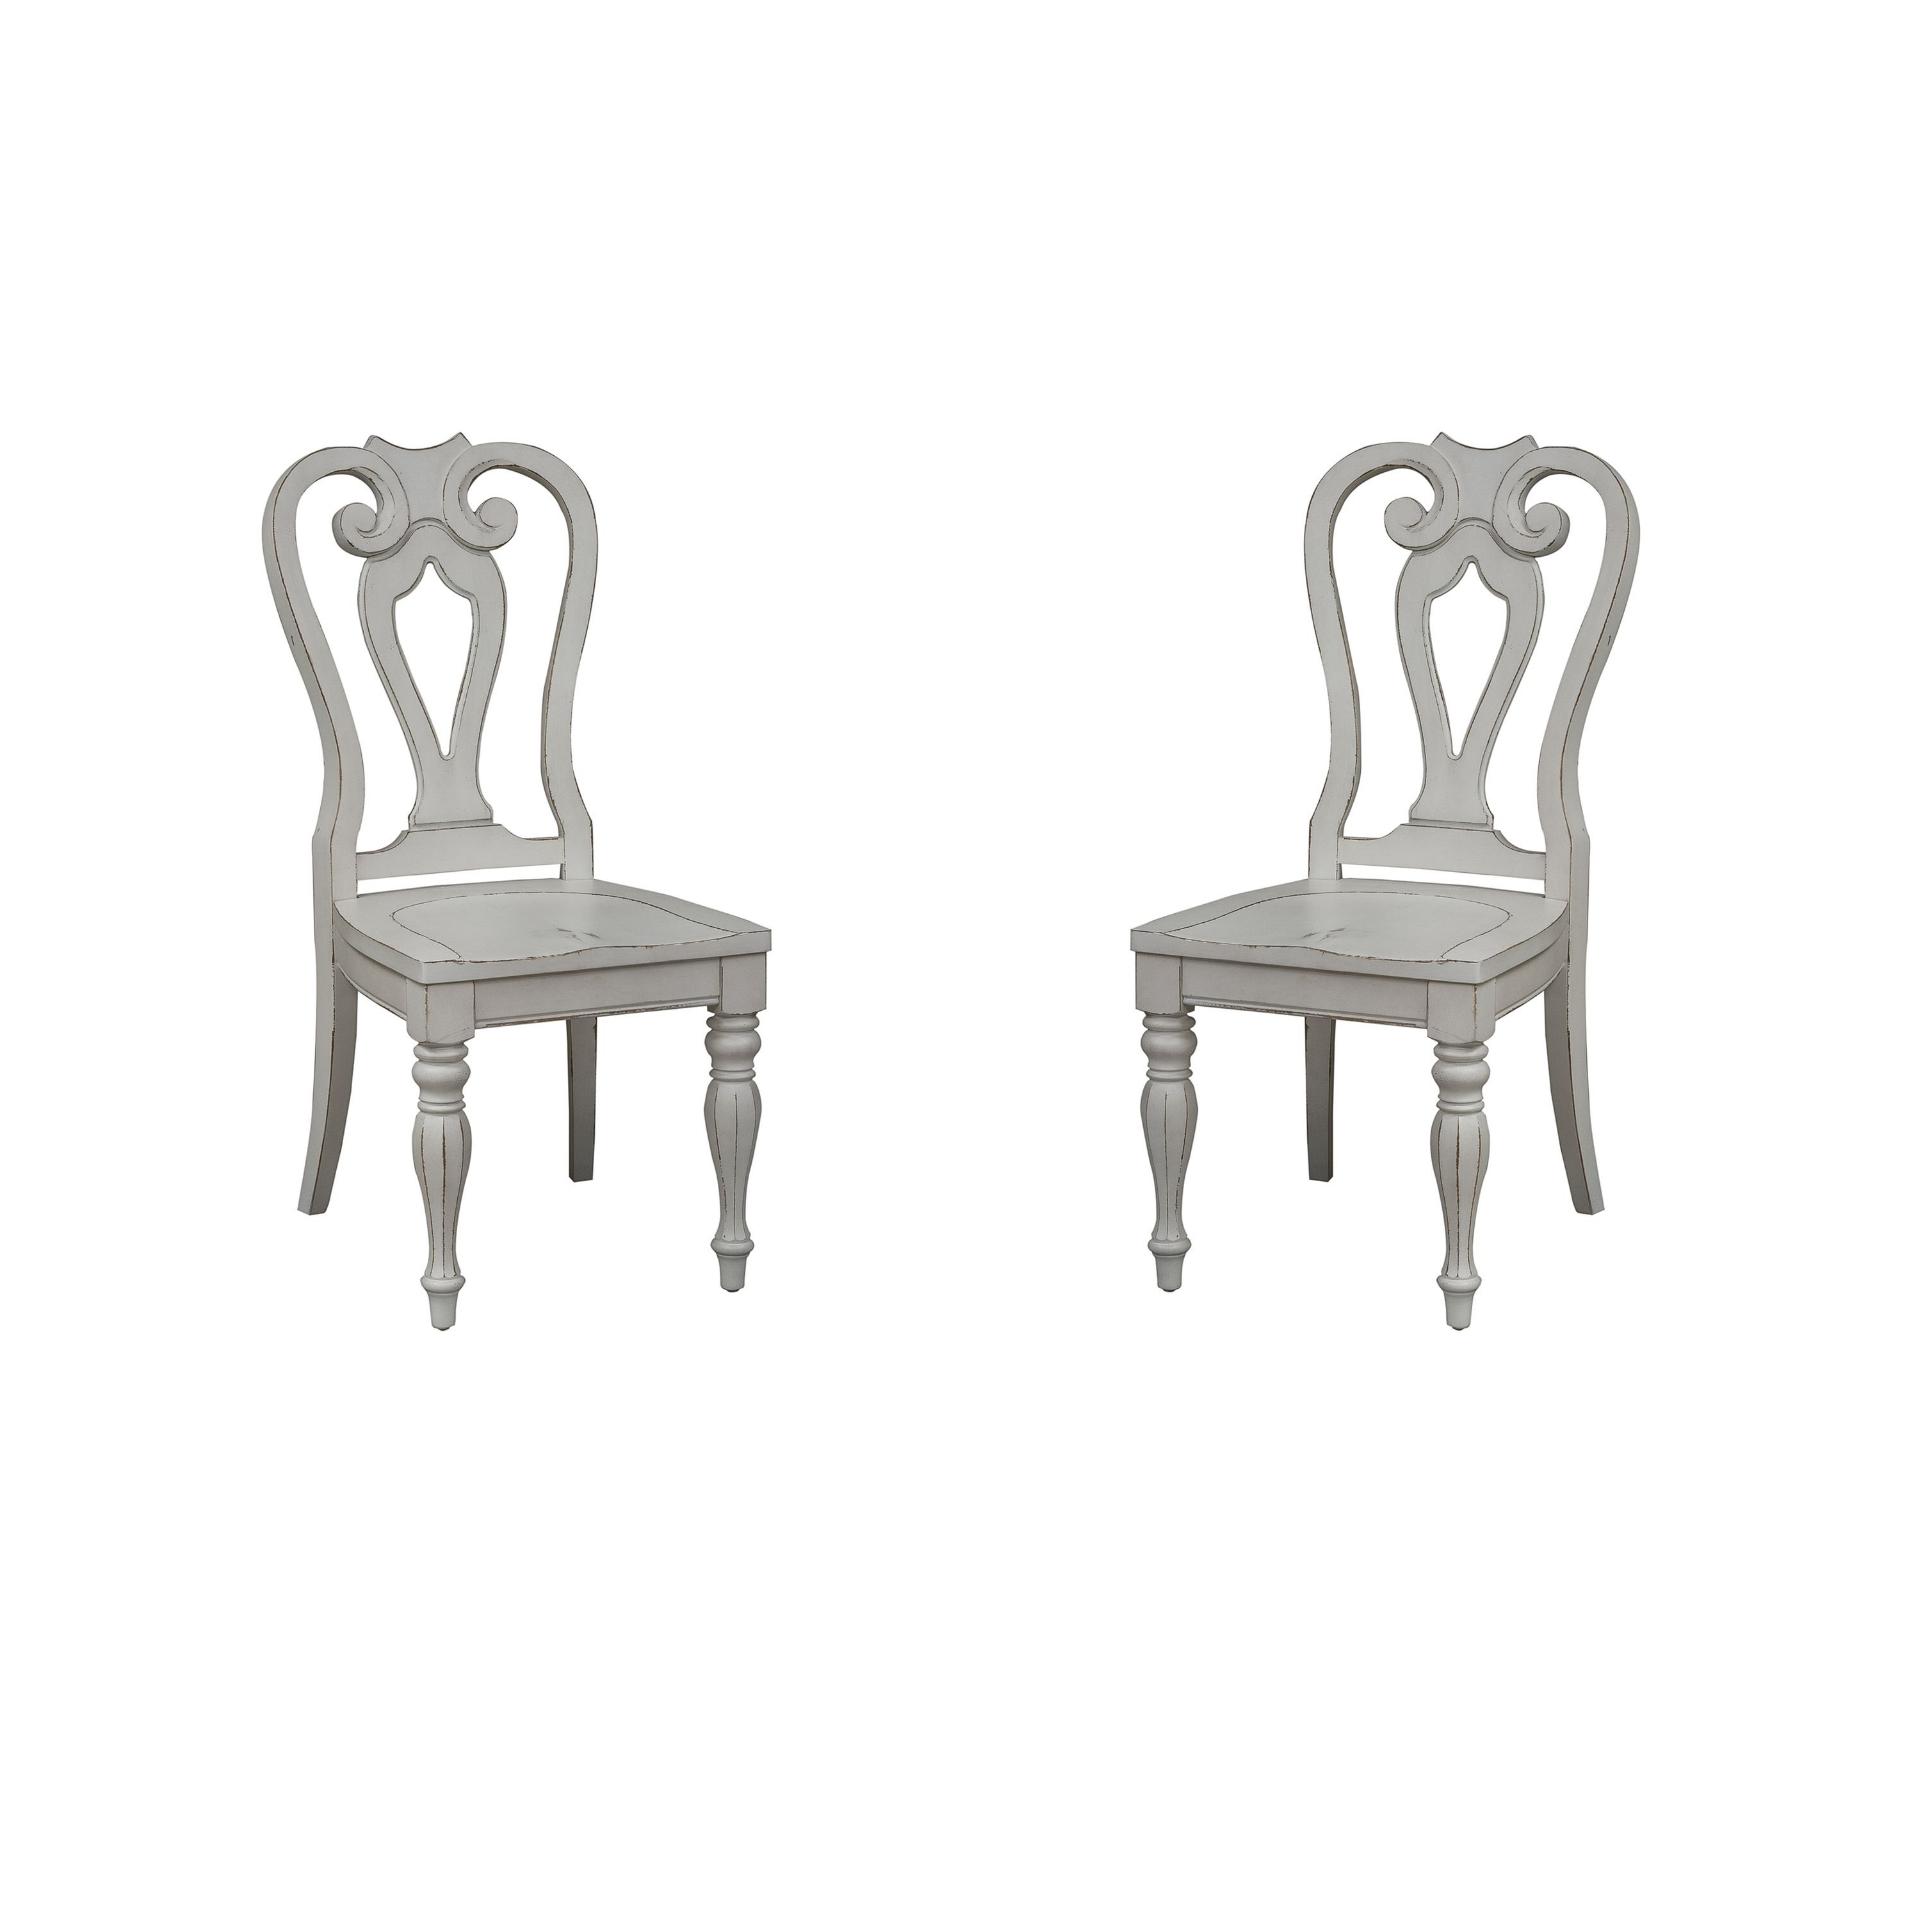 European Traditional Dining Chair Set 244-C2500S-Set 244-C2500S-2PC in White 